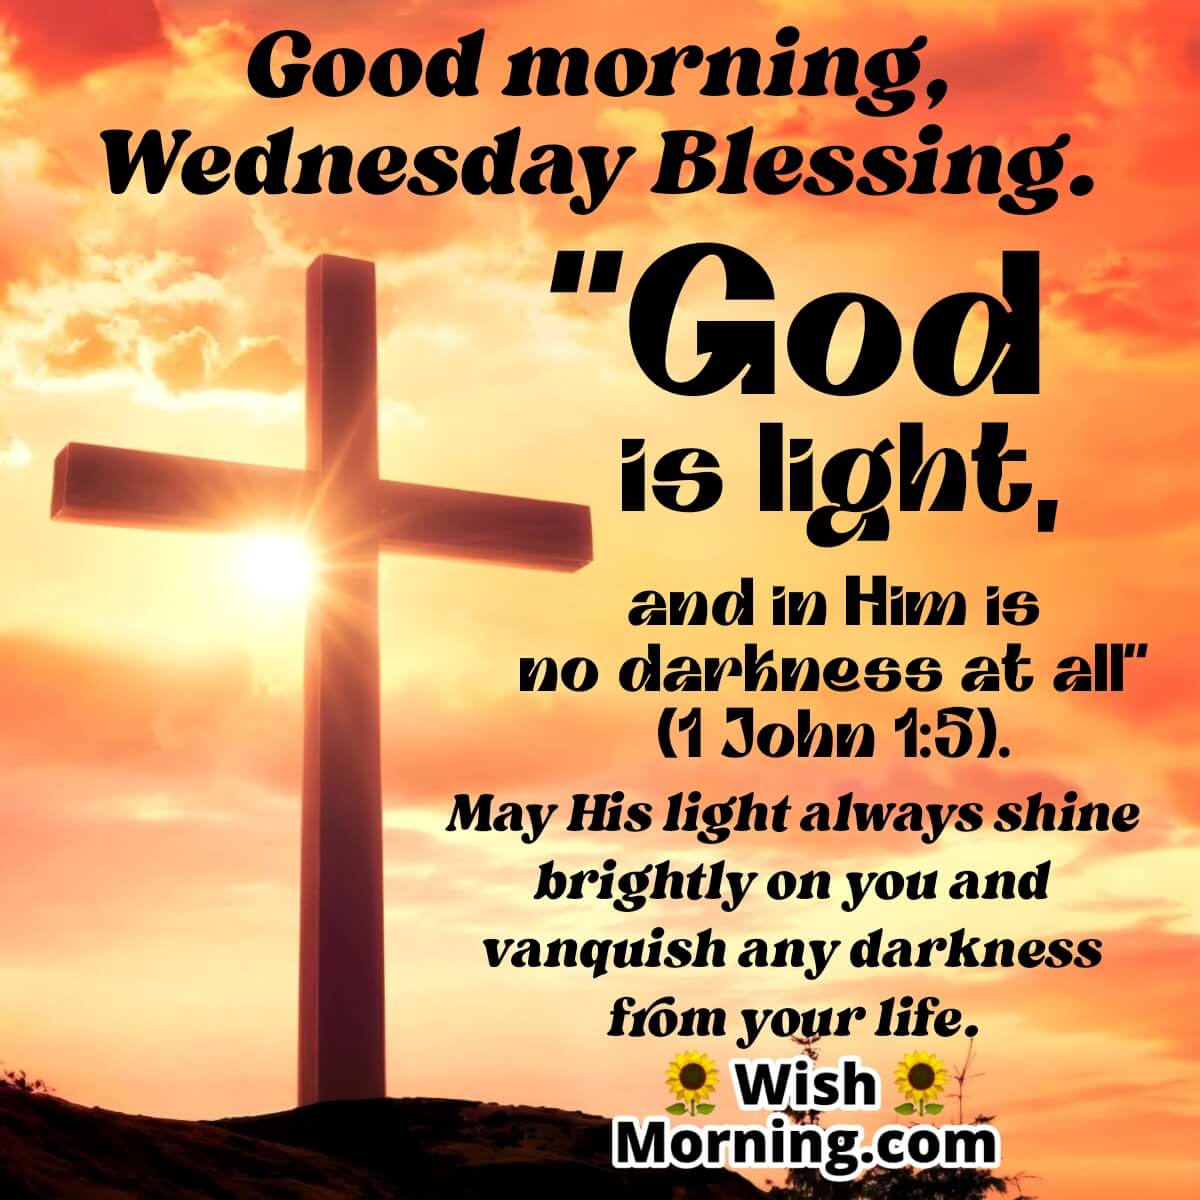 Wednesday Blessings Image